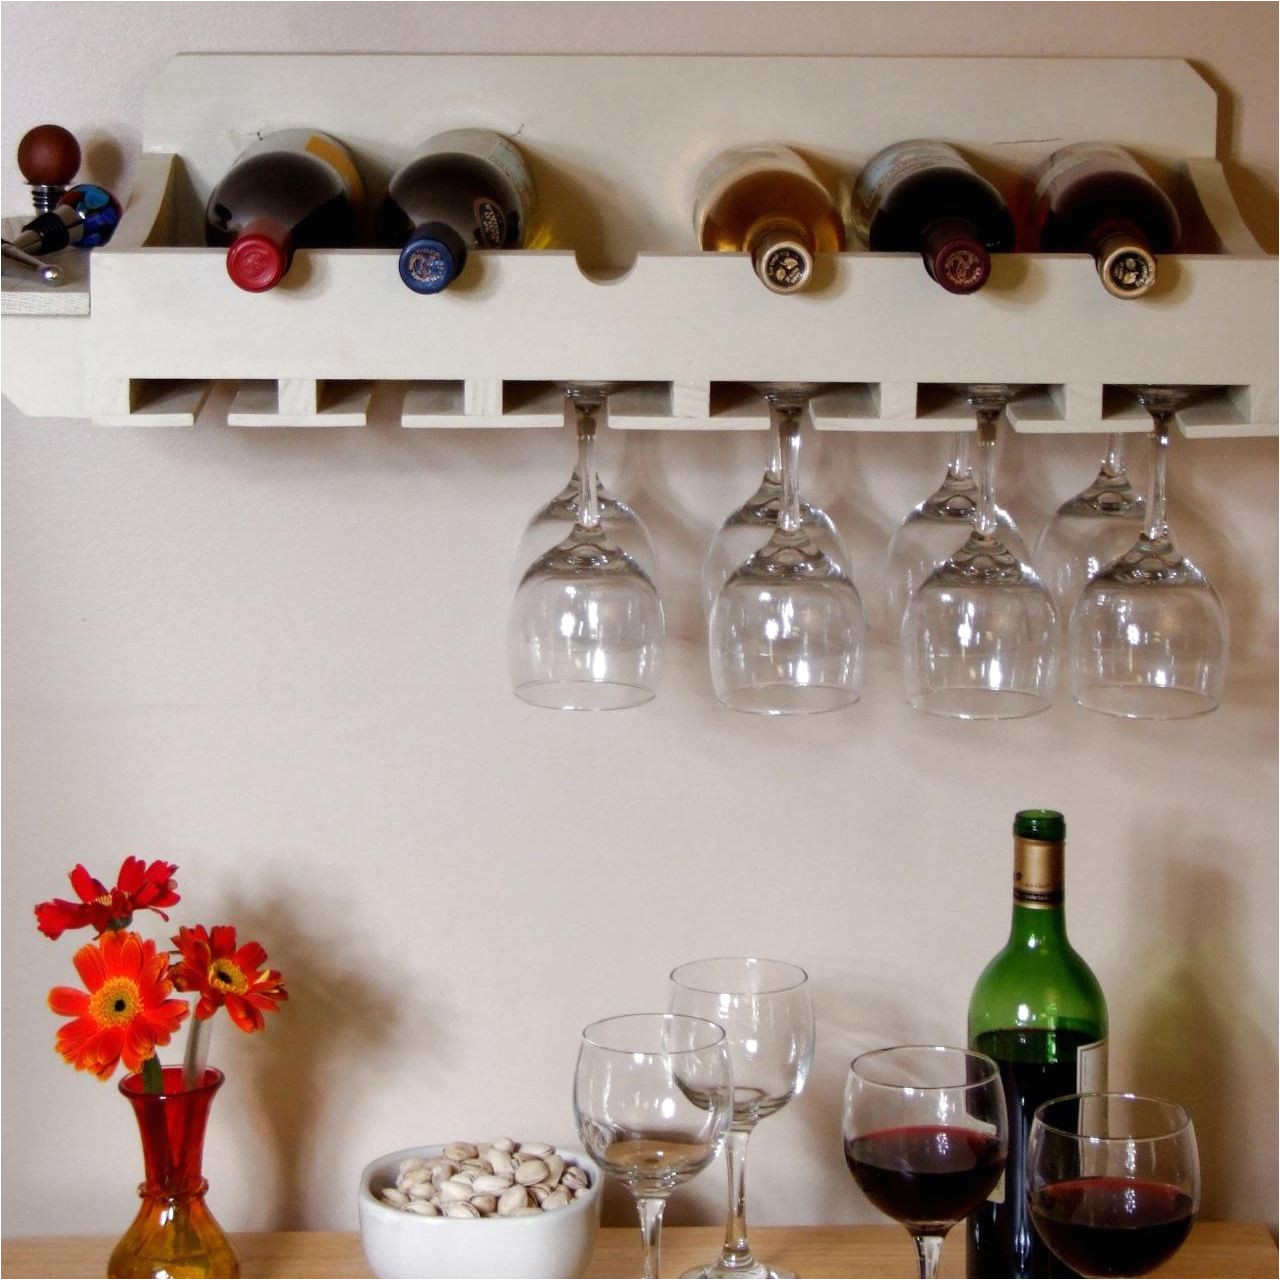 a wine rack with places for bottles and glasses diy network